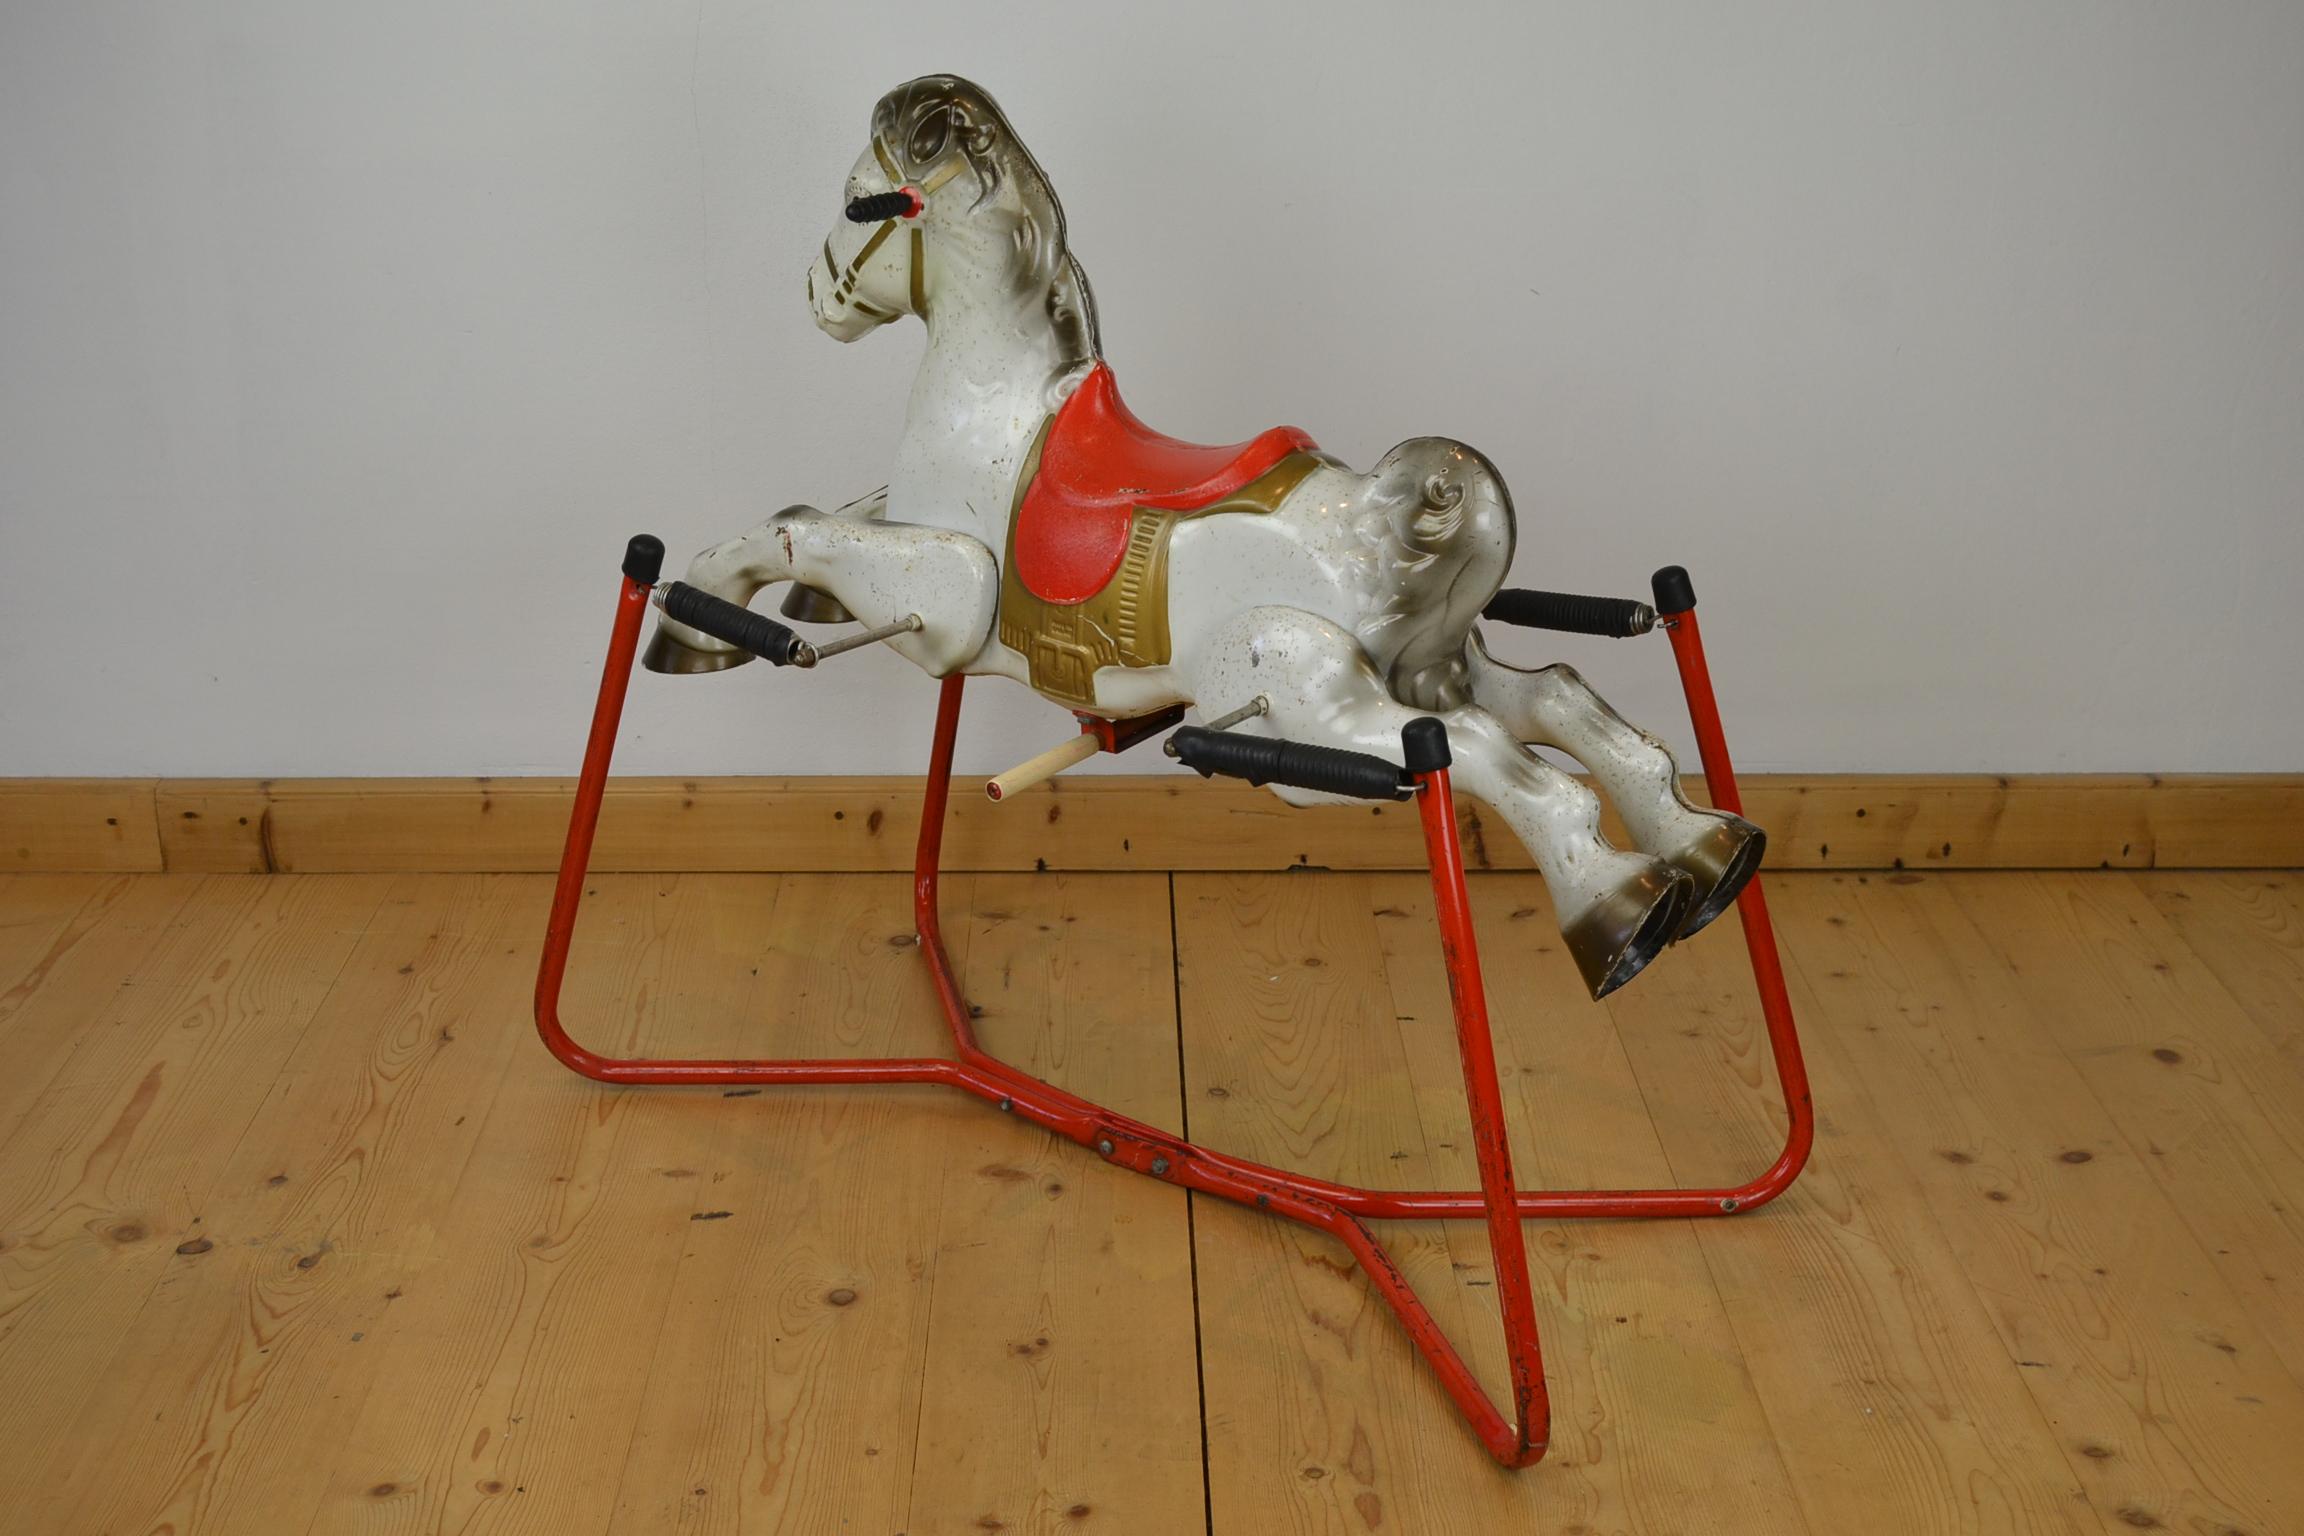 Mobo Prairie King Rocking Horse Toy, England, 1960s For Sale 5